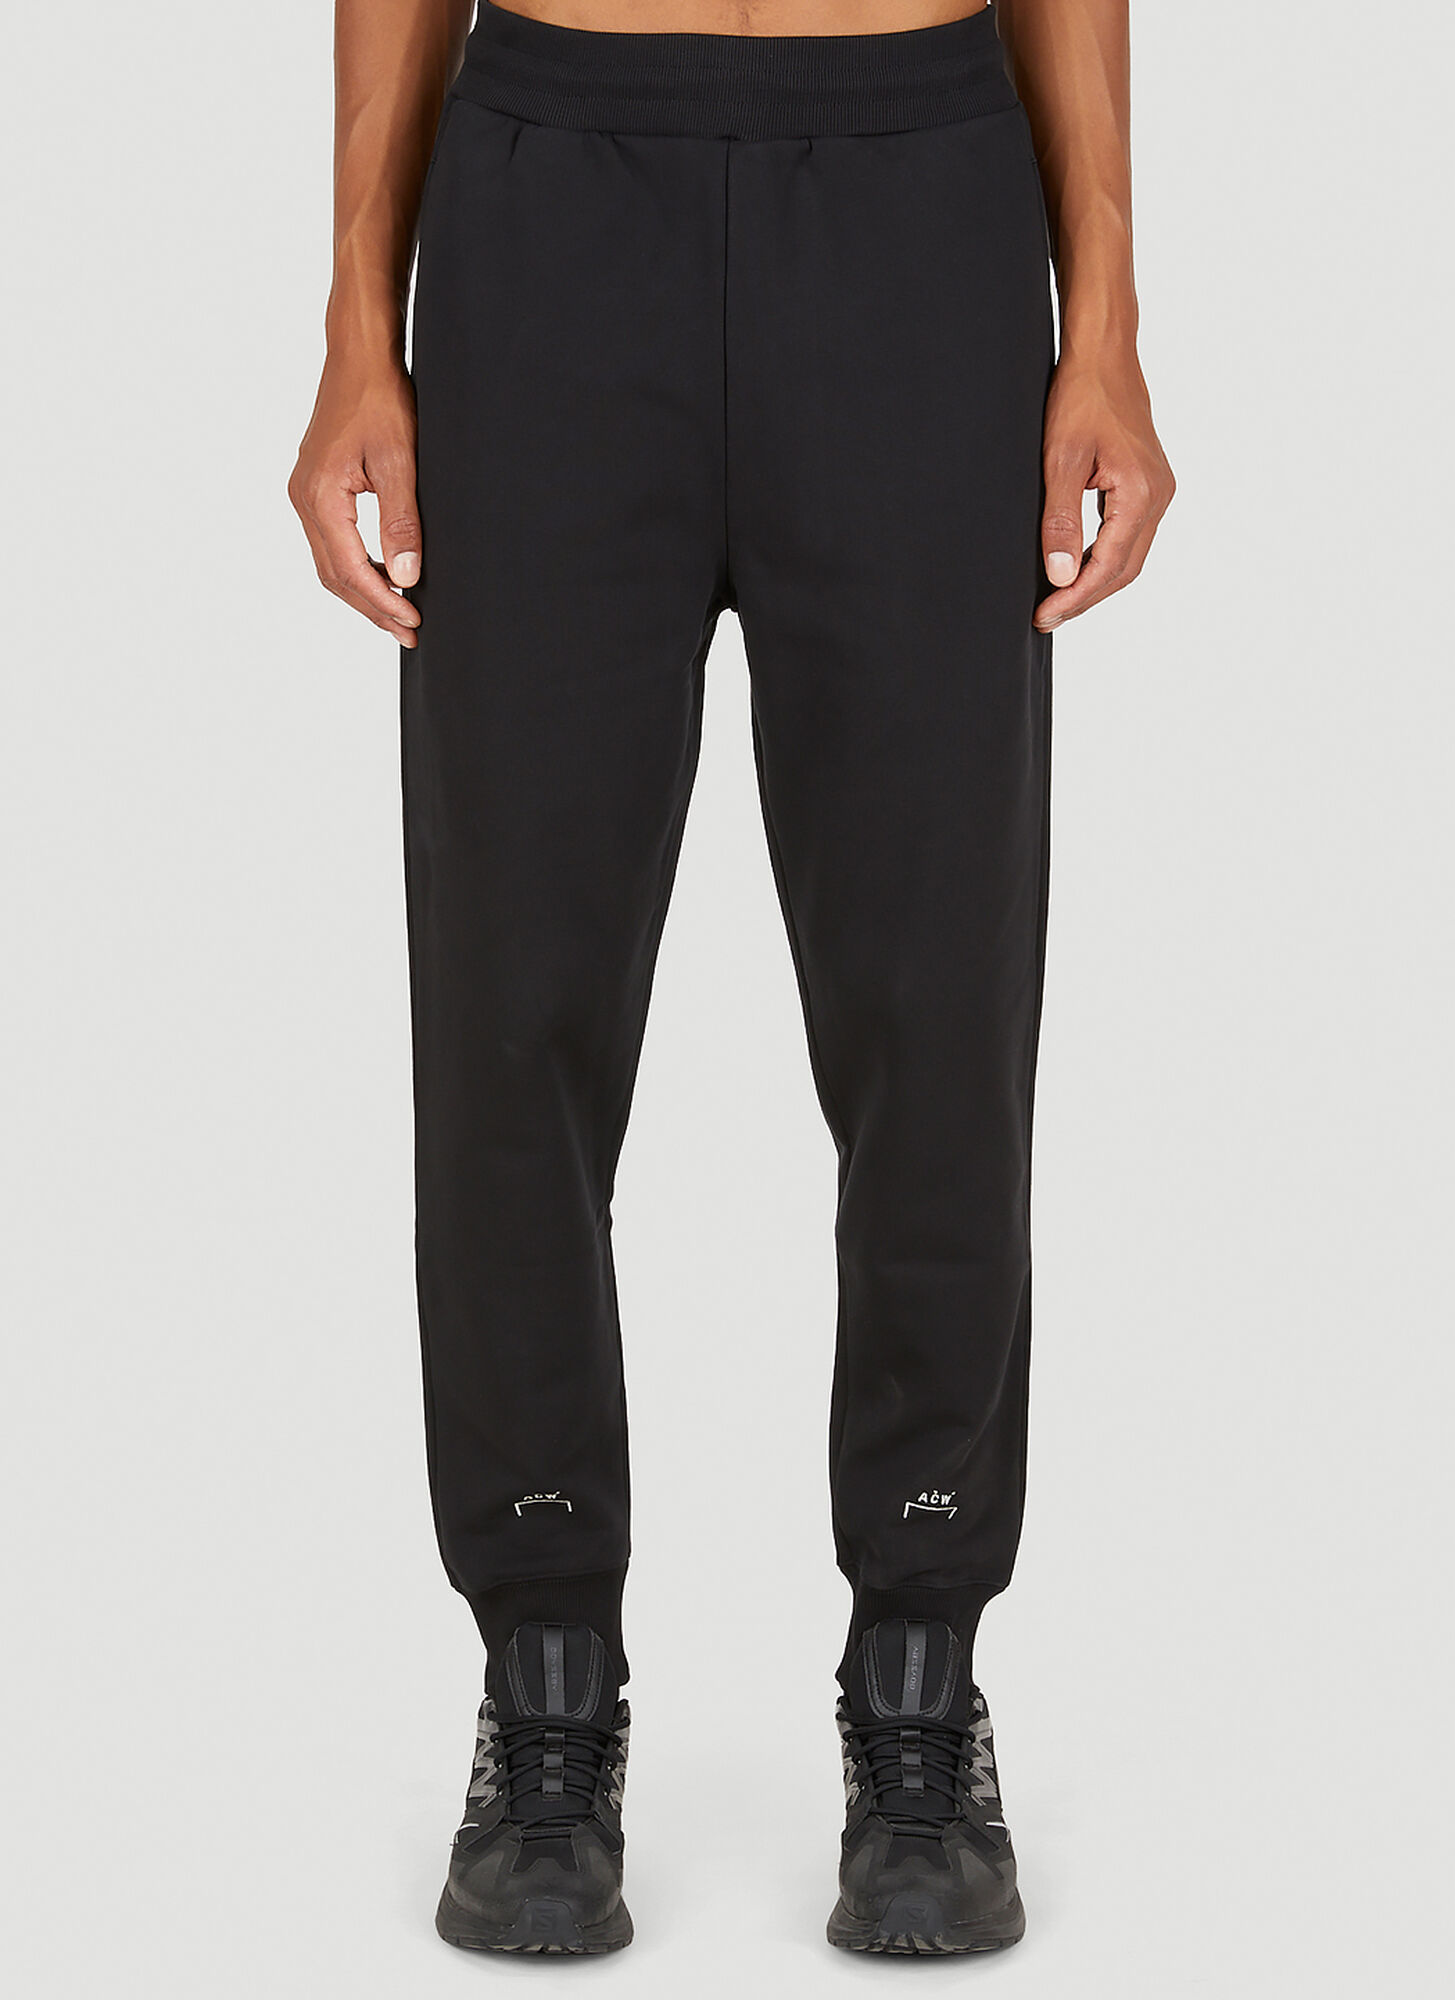 A-cold-wall* Essential Track Pants